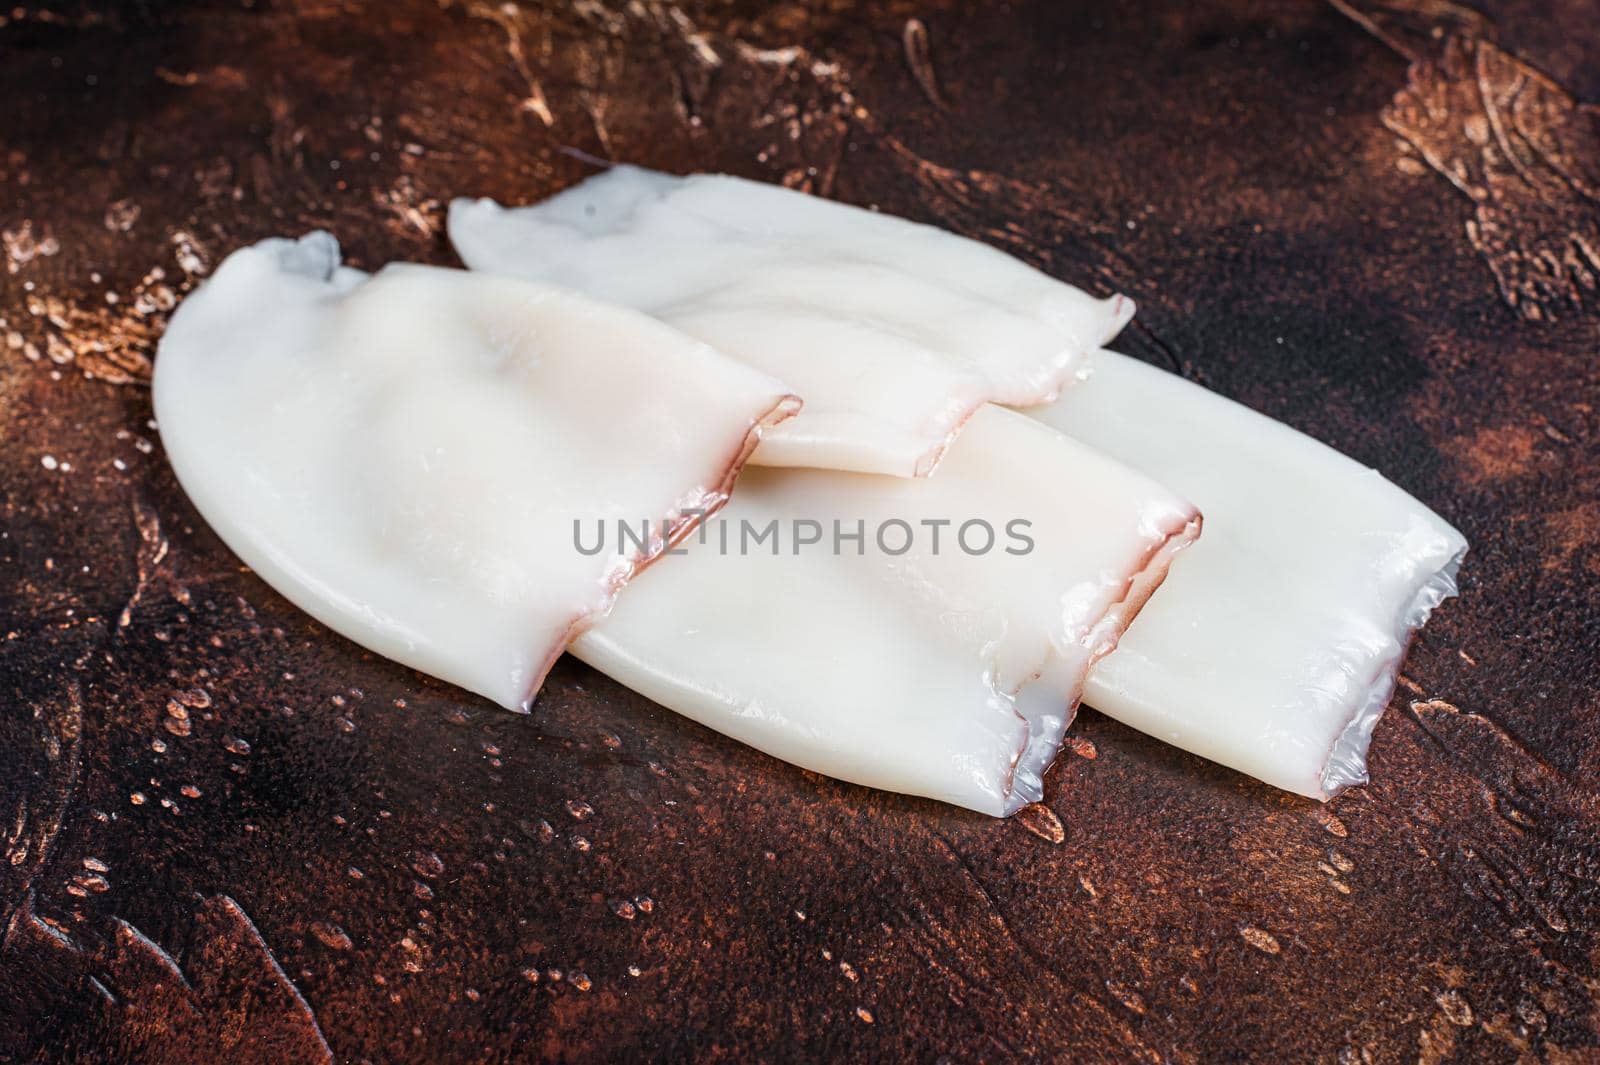 Raw Squid or Calamari tubes on a kitchen table. Dark background. Top view by Composter